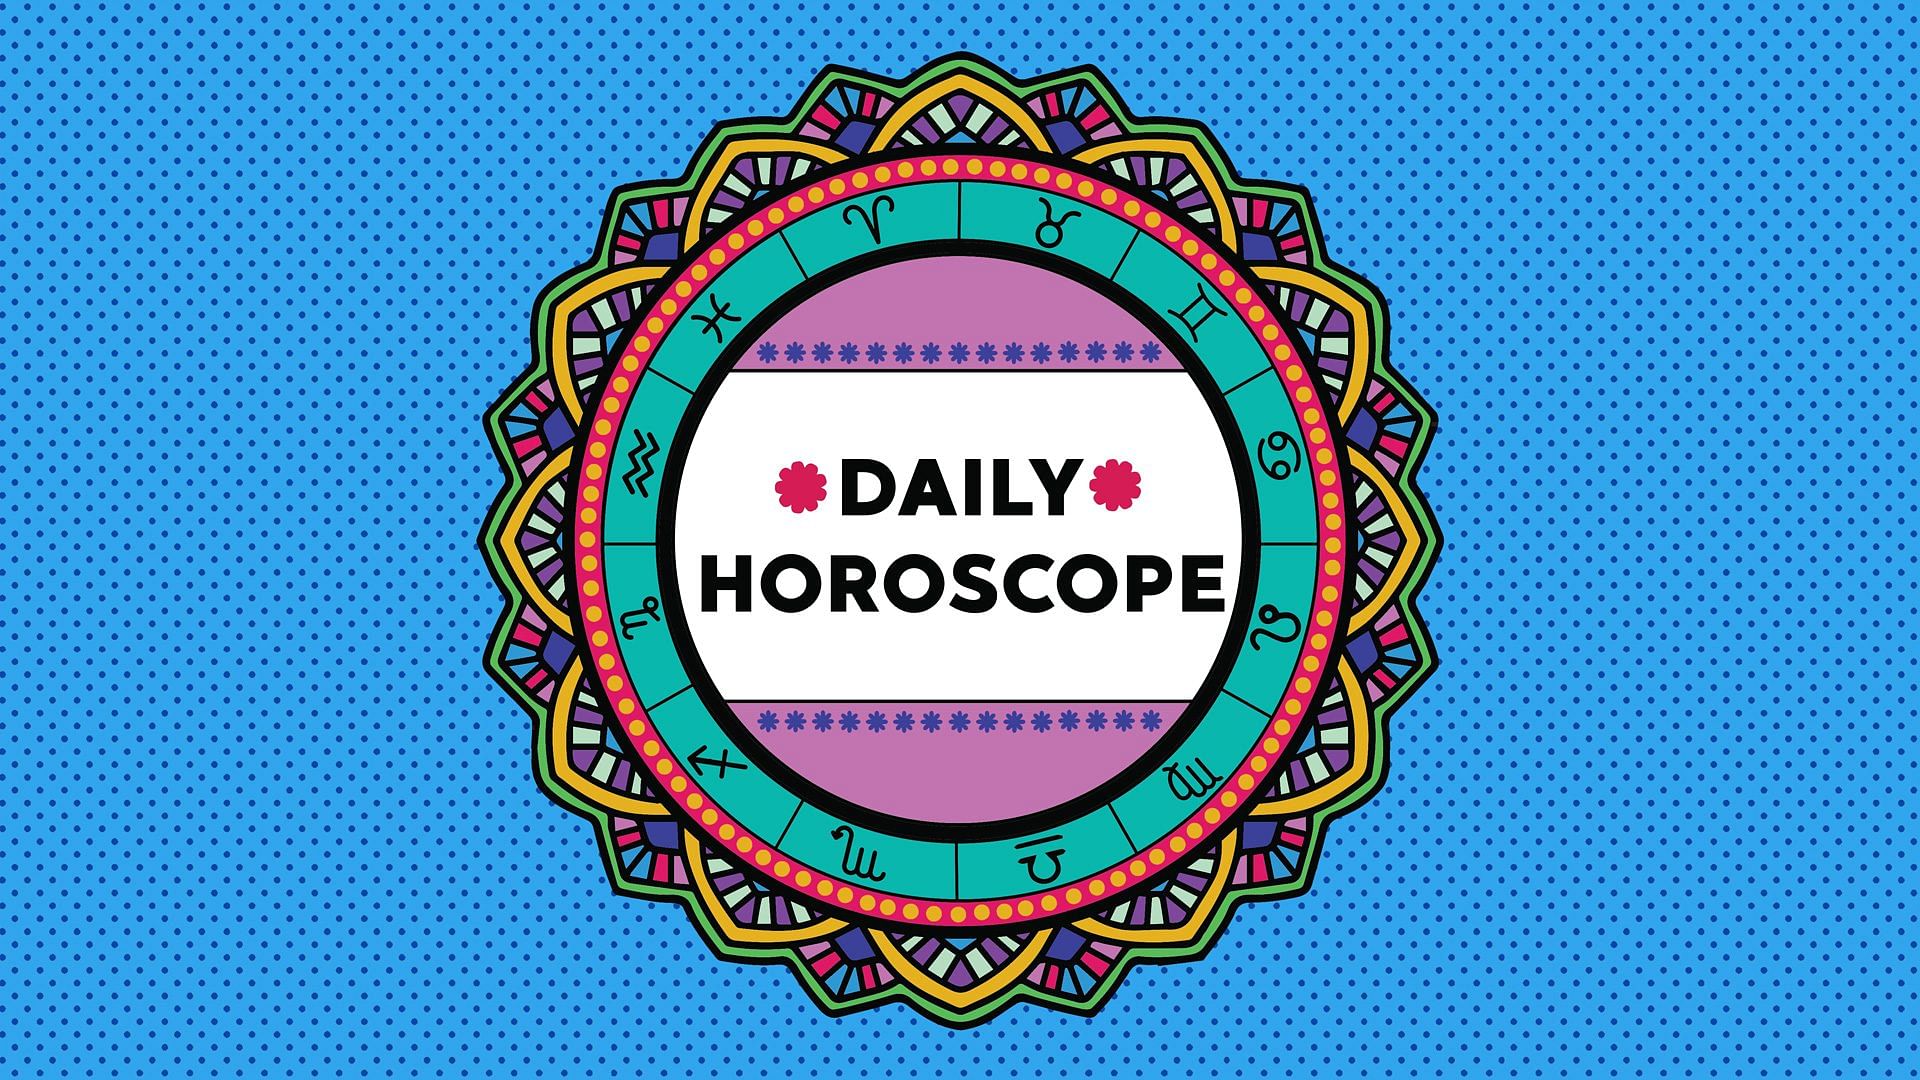 Daily horoscope 11.09.21 Know about the events that might occur today and how to manage them